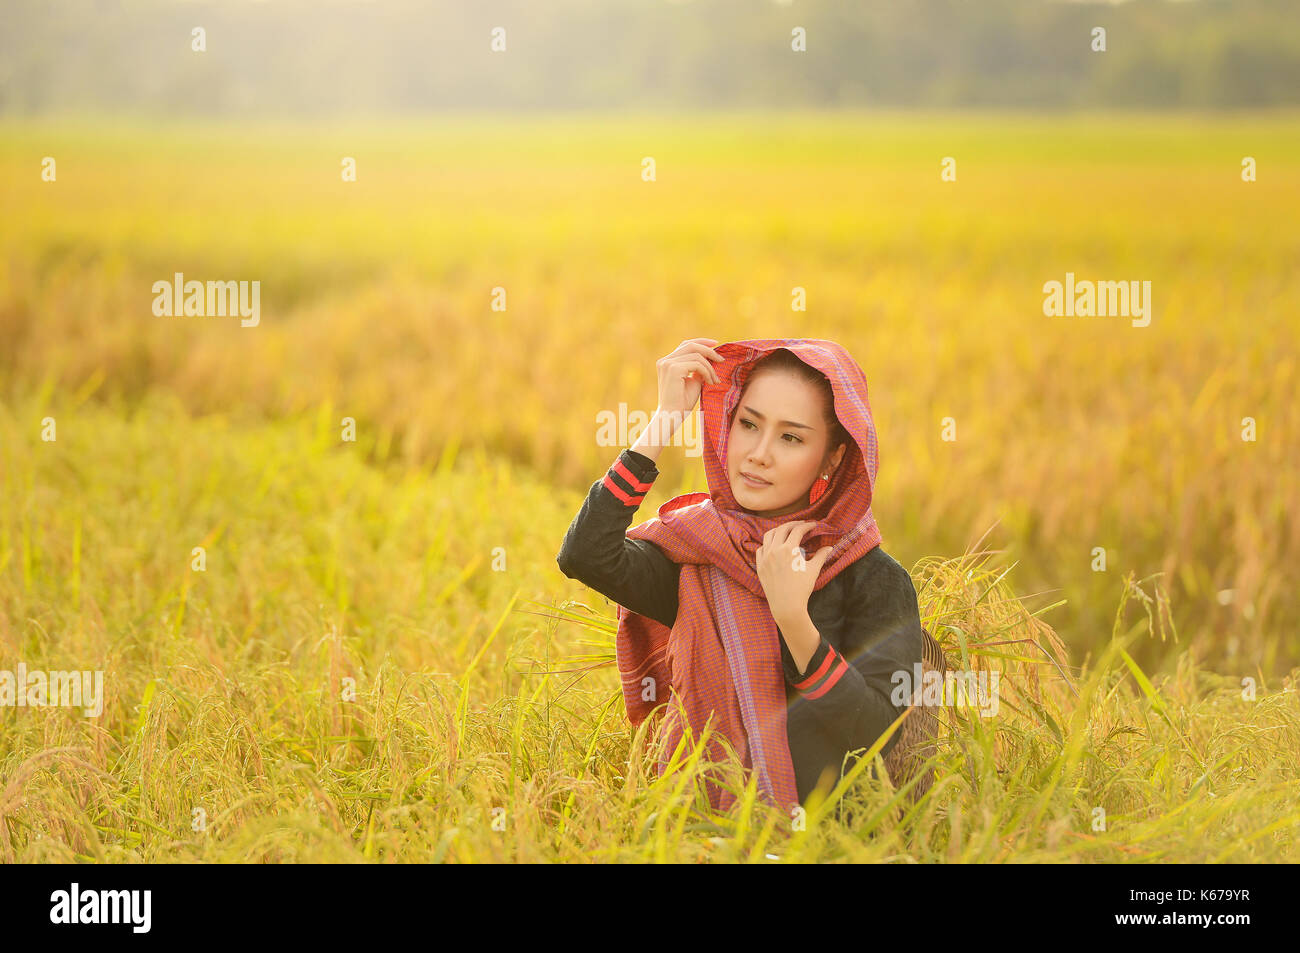 Portrait of a woman standing in a field, Thailand Stock Photo